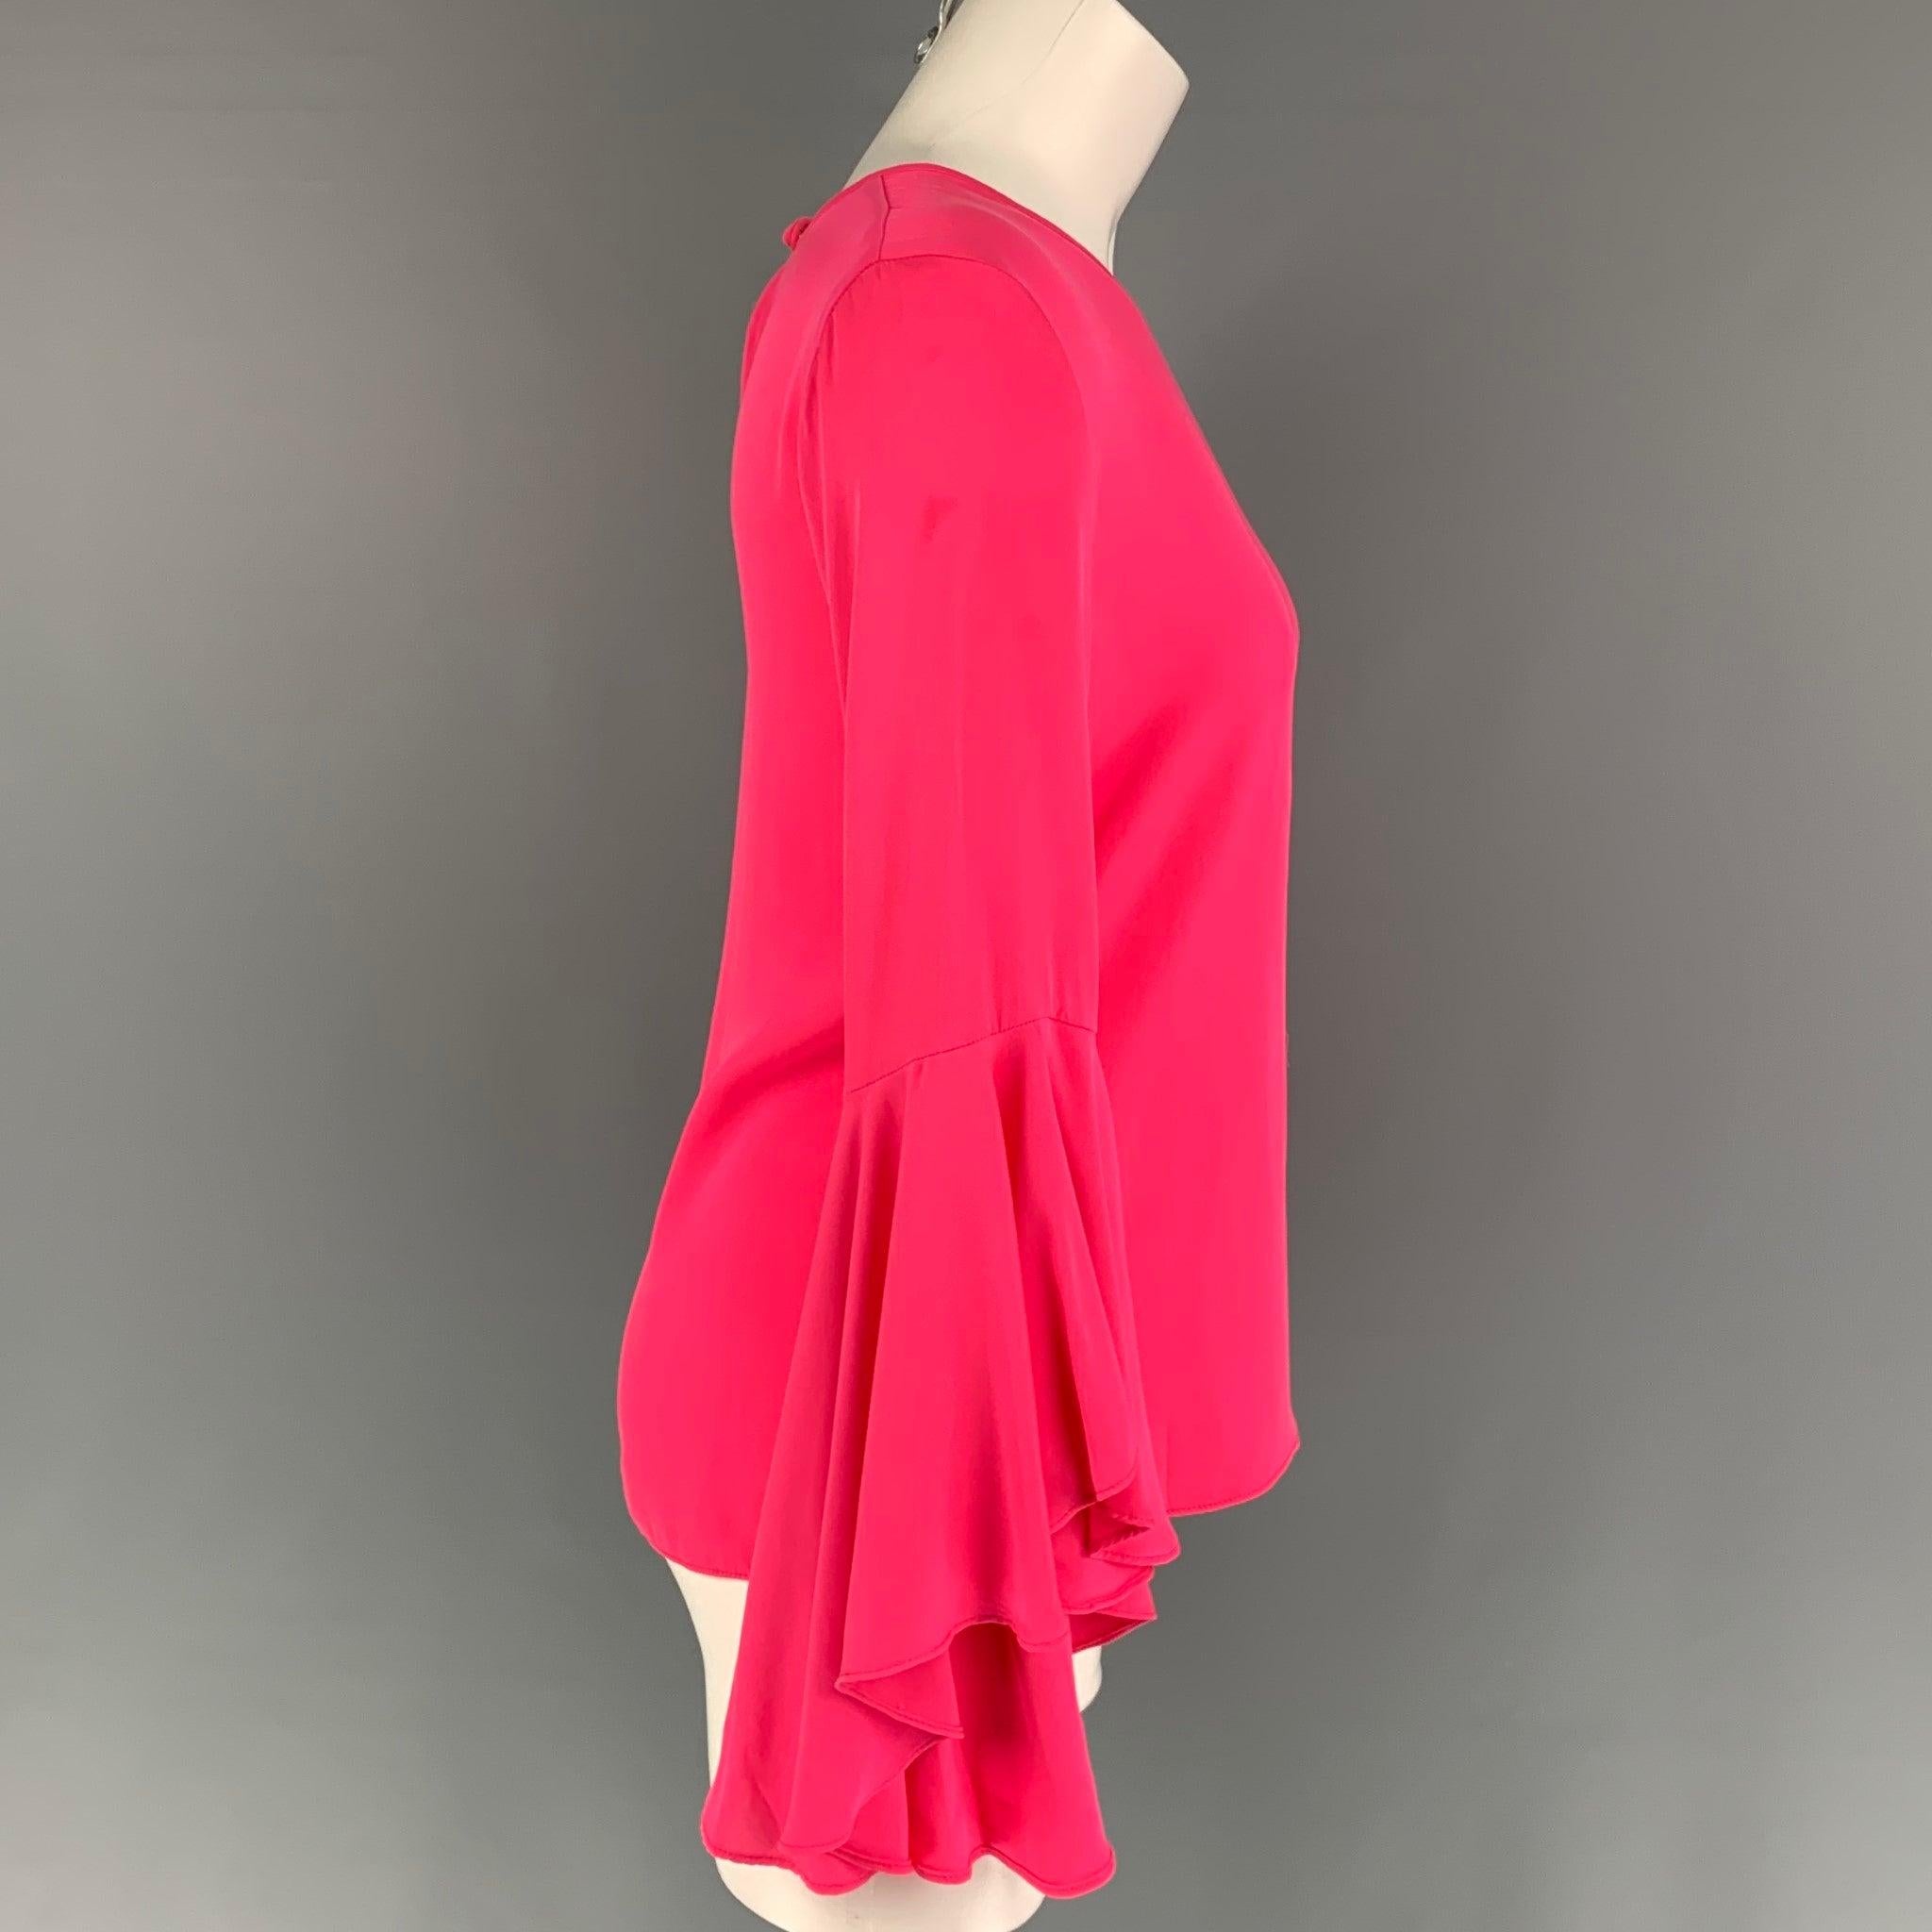 MILLY blouse comes in a pink silk featuring bell sleeves, crew-neck, and a back button closure. Made in USA. Very Good
Pre-Owned Condition. Light wear.  

Marked:   2 

Measurements: 
 
Shoulder: 15 inches  Bust: 34 inches 
 Sleeve: 21.5 inches 